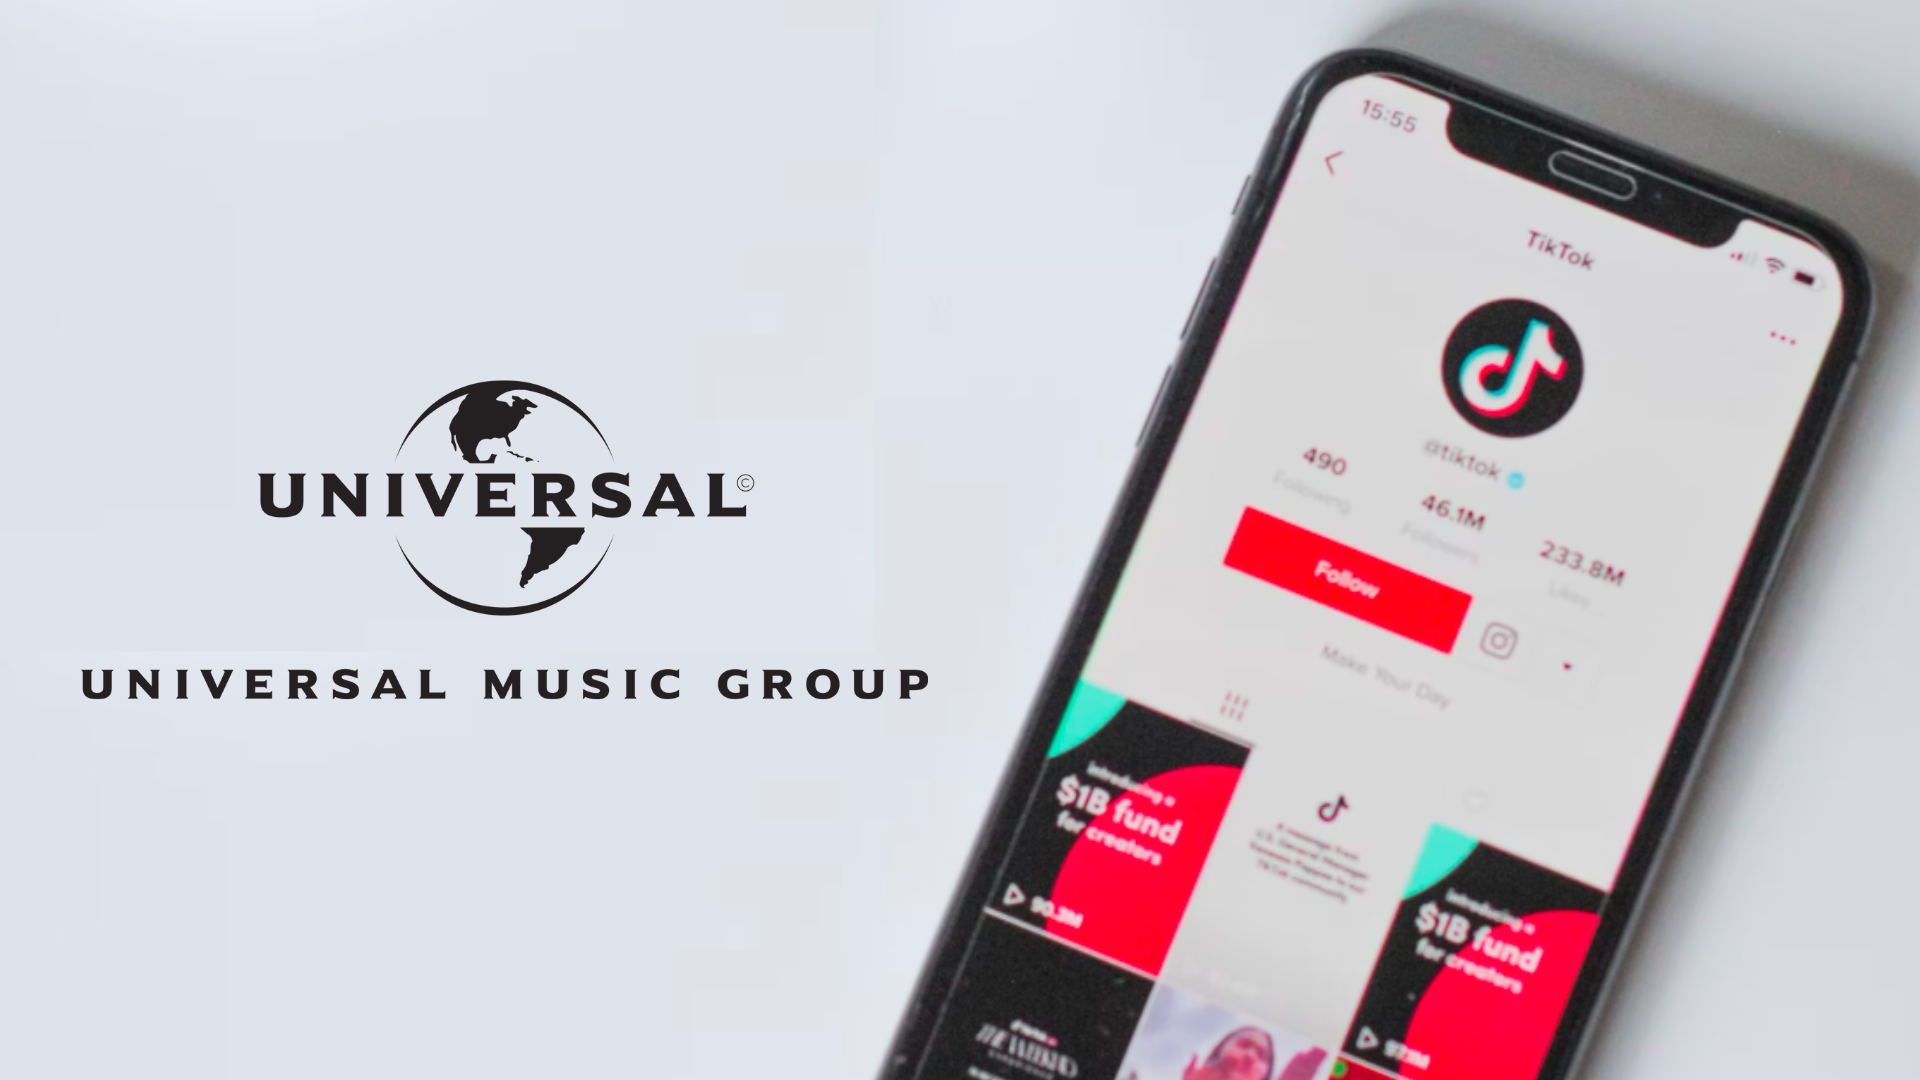 Universal Music Group Warns To Remove Songs From TikTok Once Deal Ends